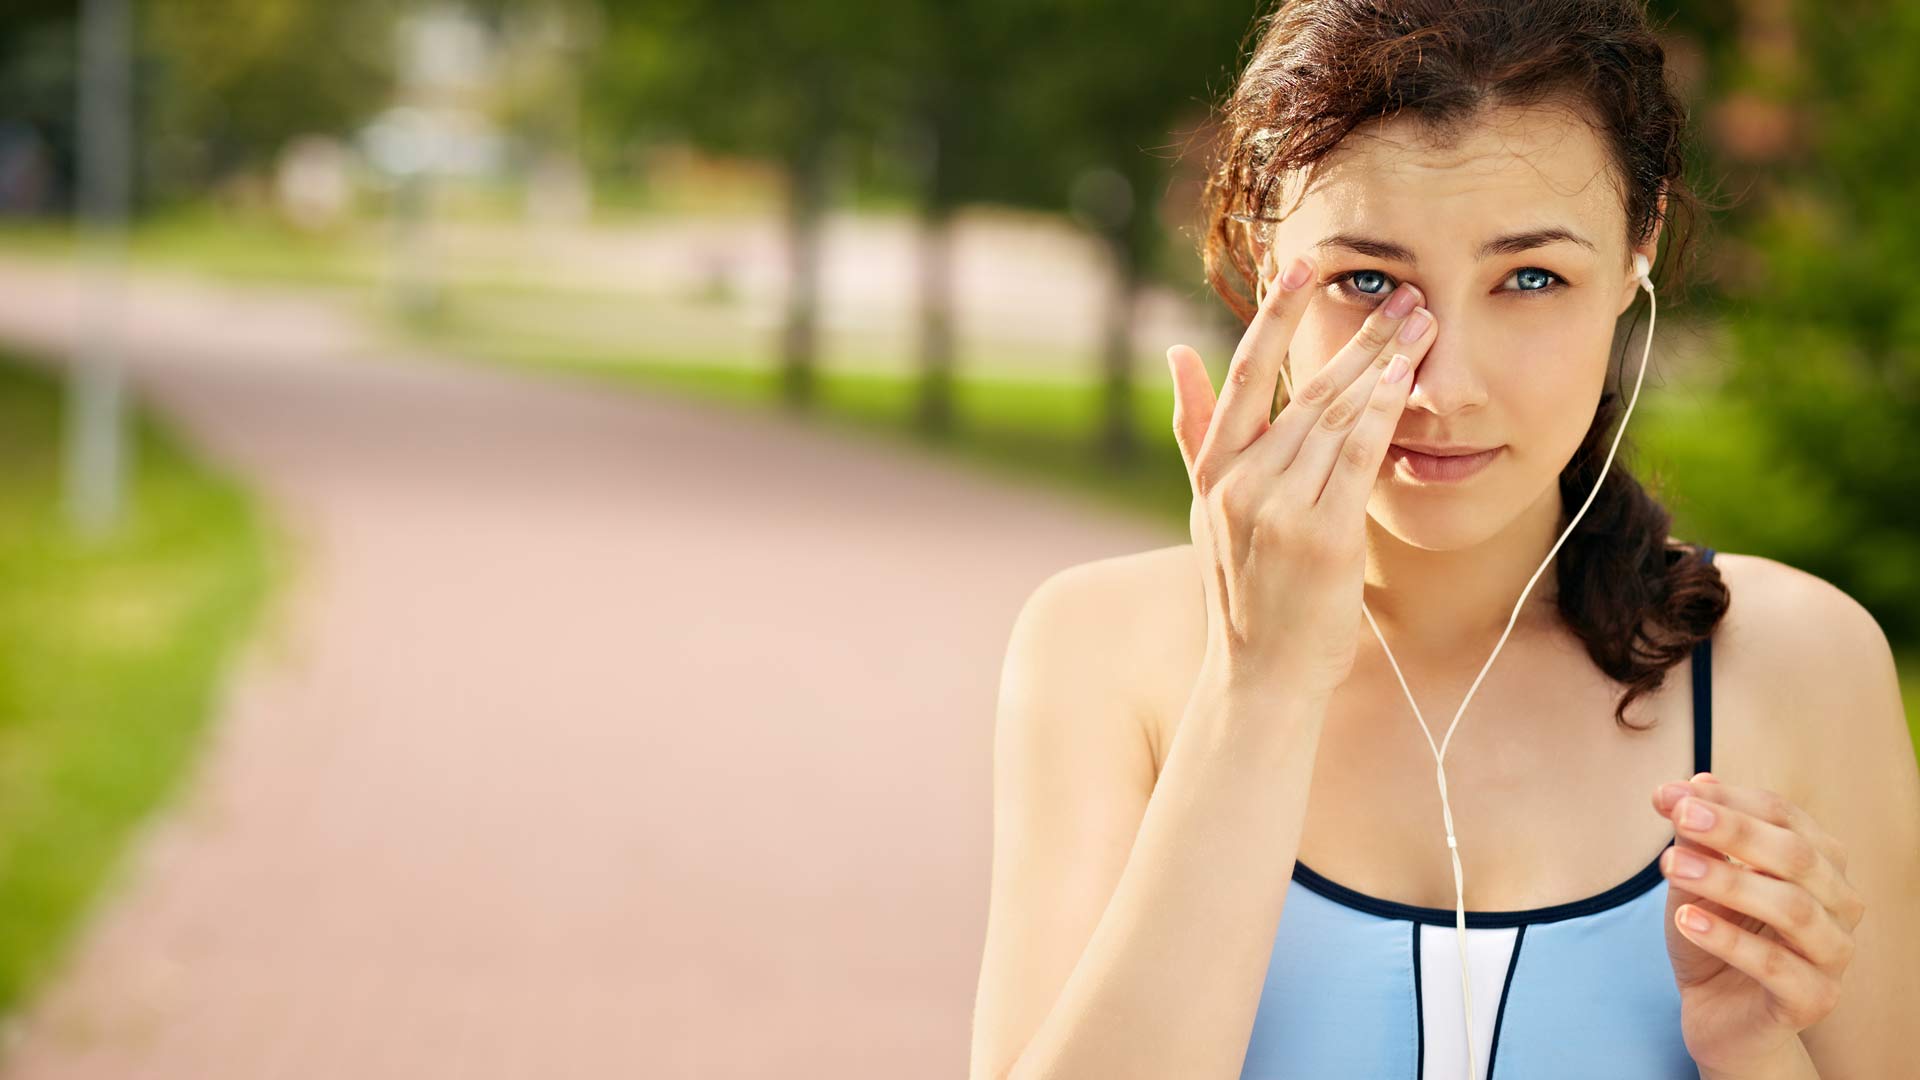 A woman touching her eye while exercising. A woman touching her eye while exercising outside on a running trail.